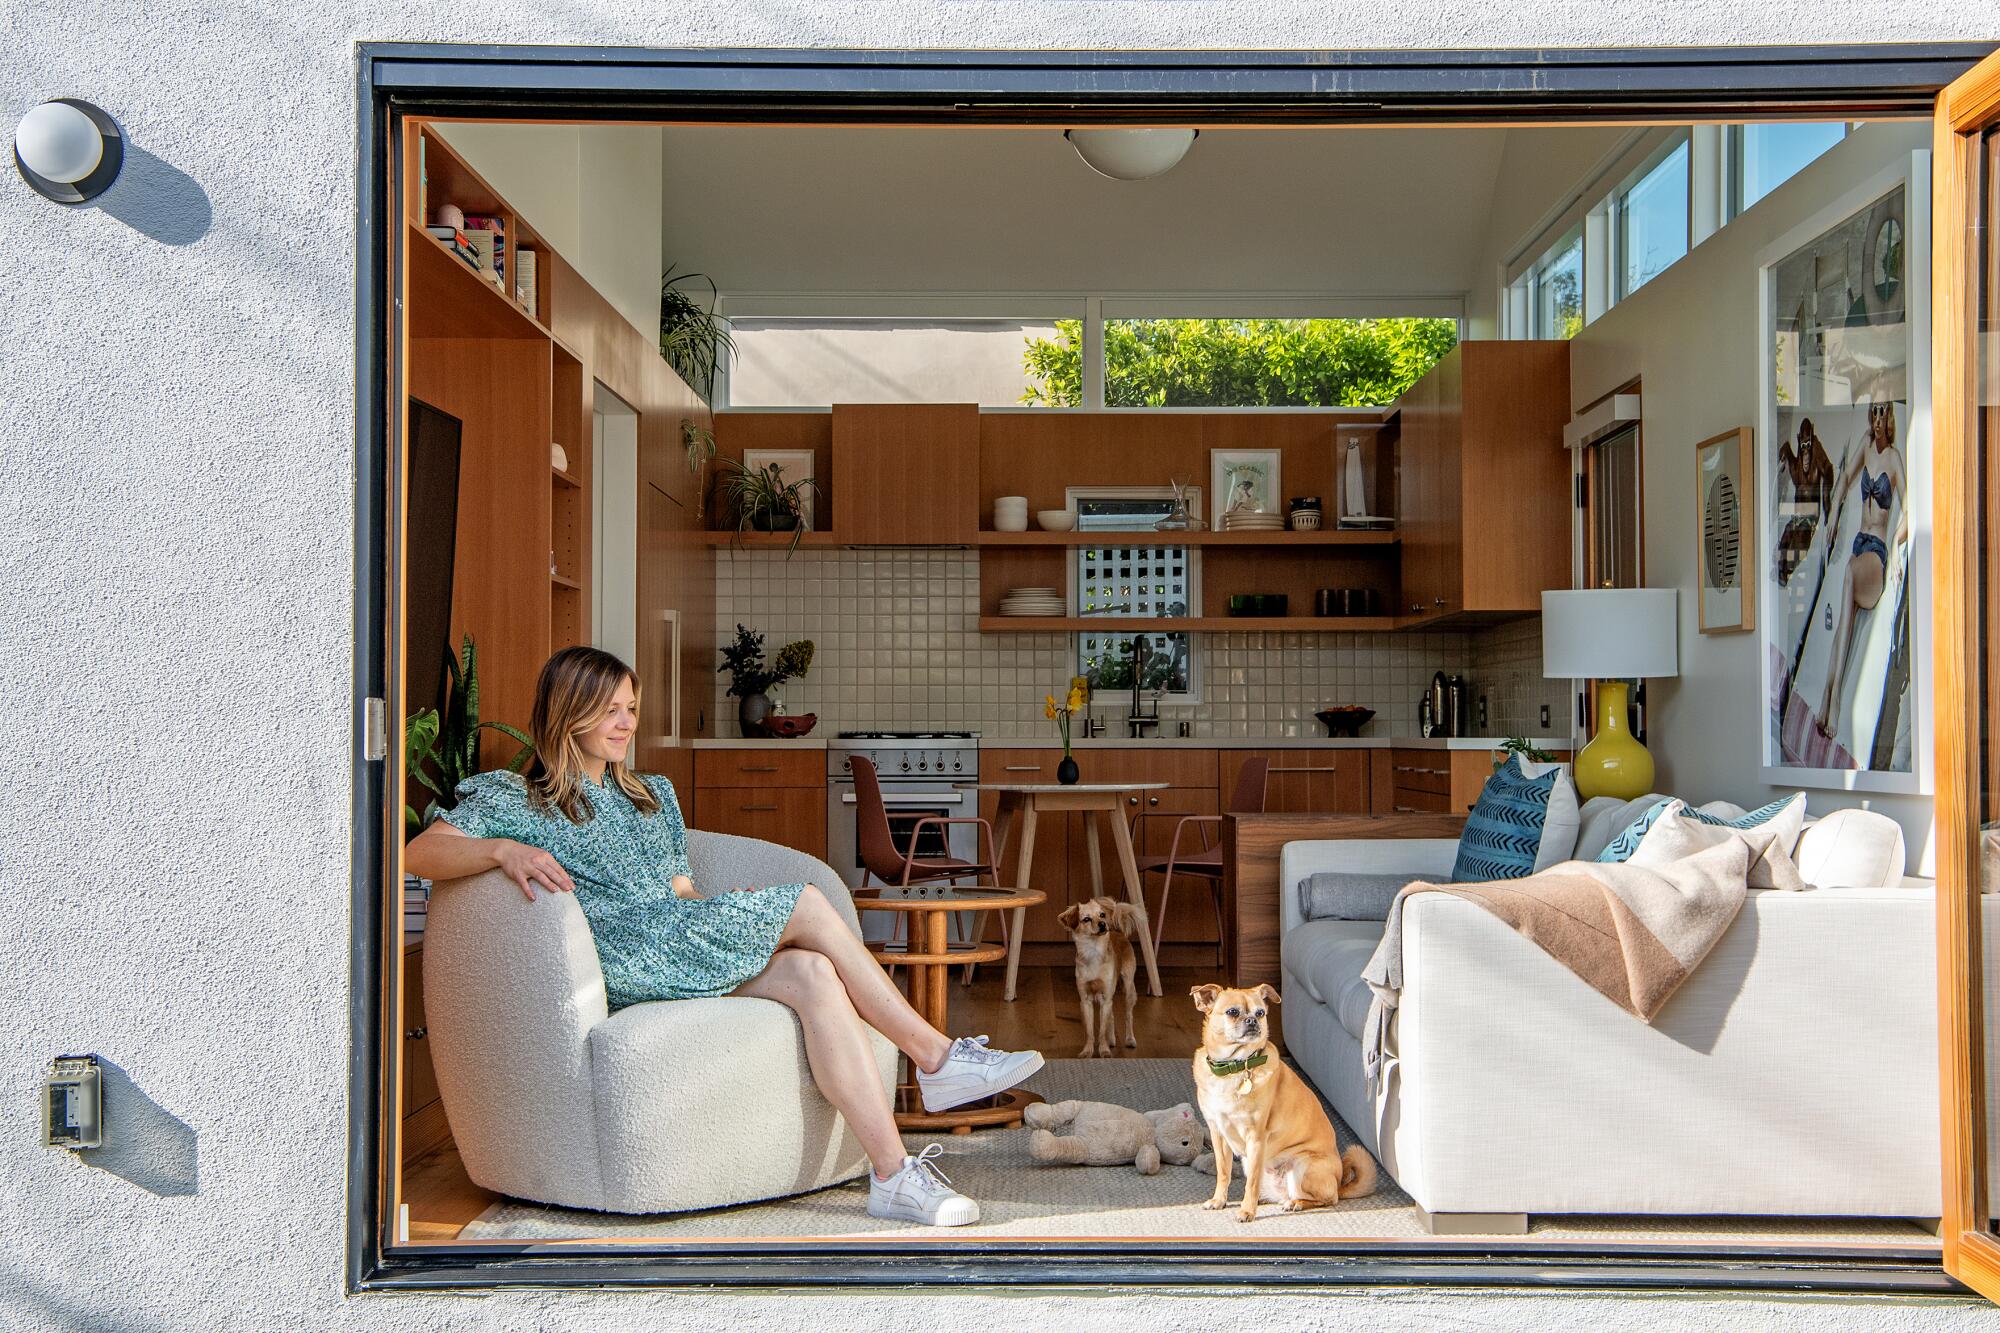 Bridget Bousa sits next to open doors in the living room of a tiny ADU, with a small dog at her feet.